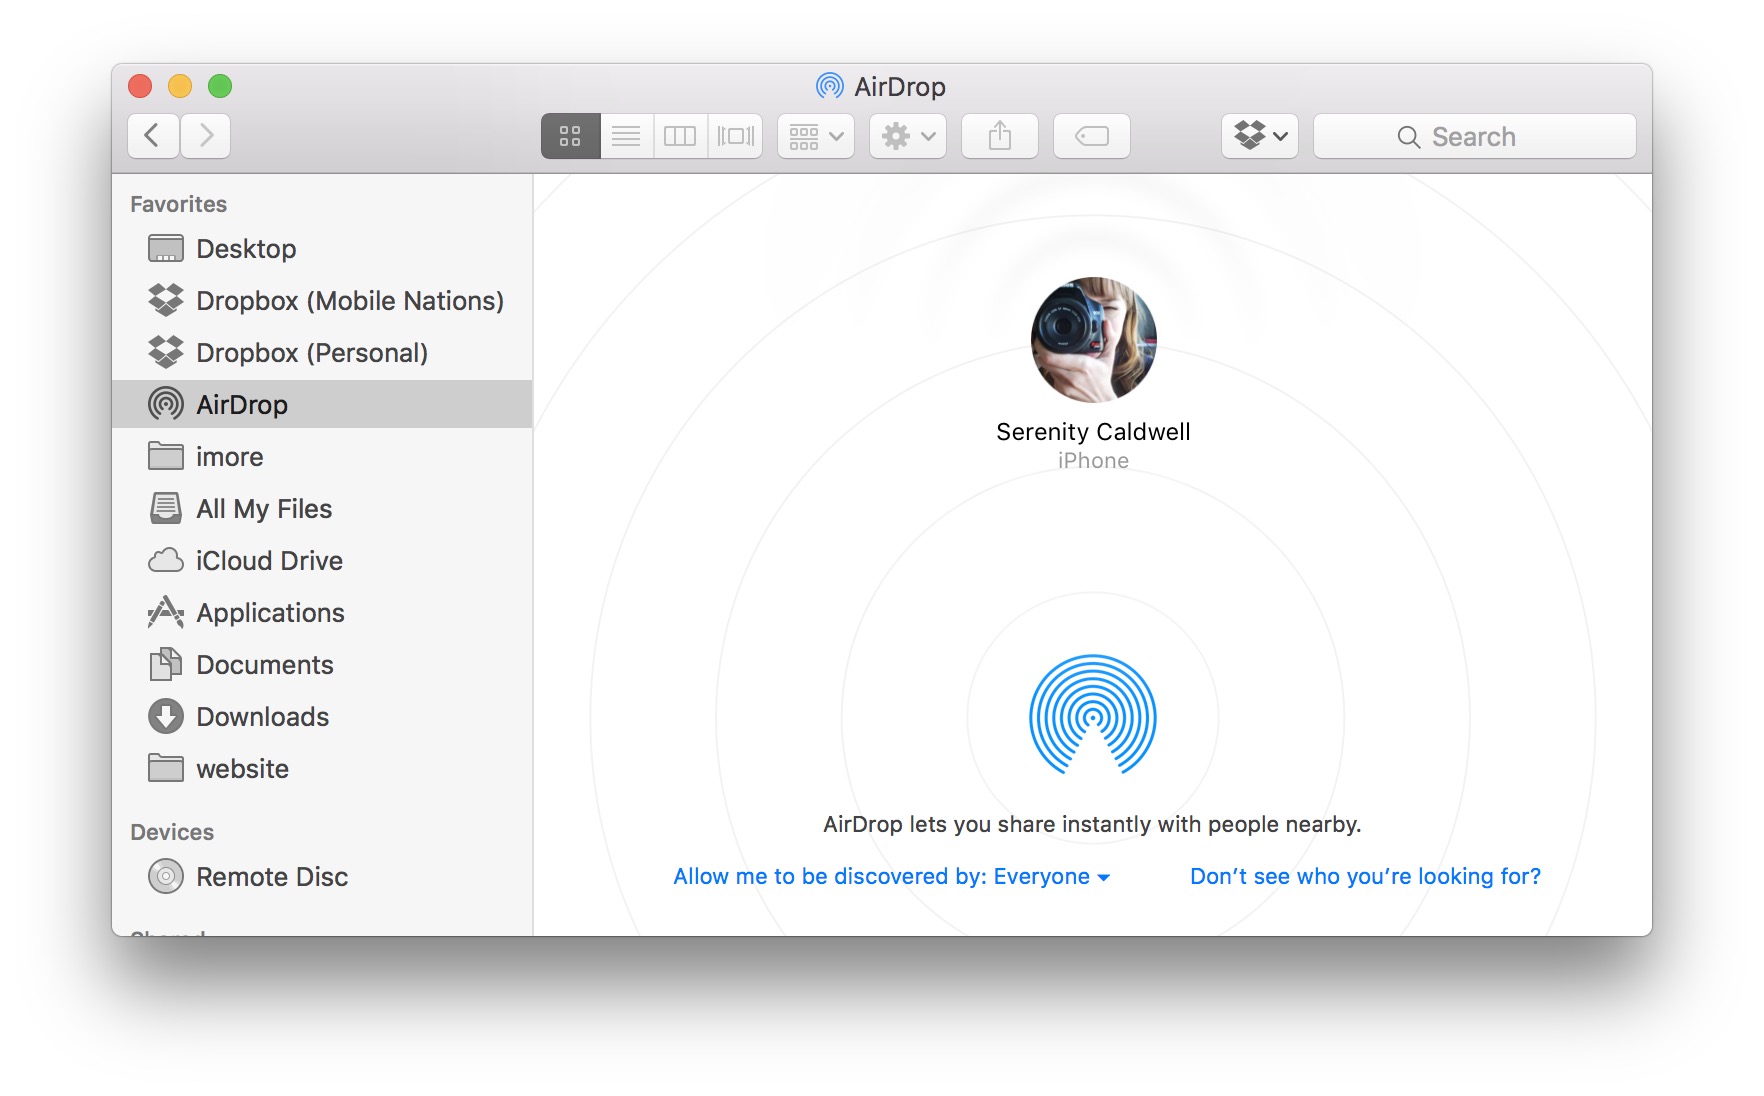 How to use AirDrop to transfer photos from your Mac to iPhone or iPad by showing steps: Open Finder on your Mac, then click AirDrop in the sidebar. Your iPhone or iPad should show up there.